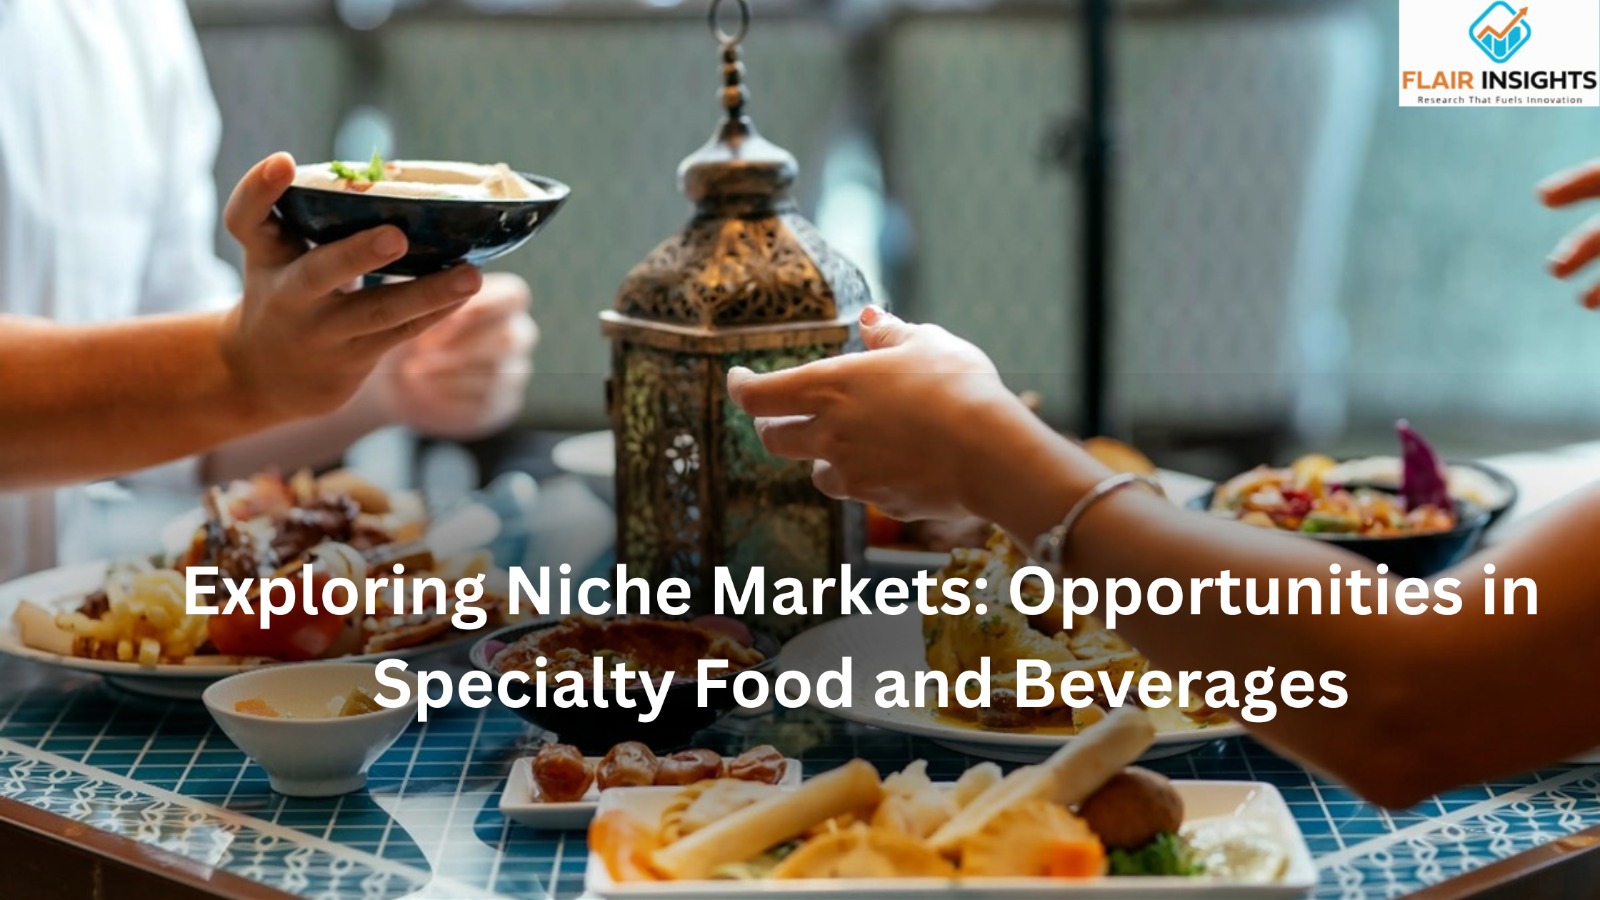 Exploring Niche Markets: Opportunities in Specialty Food and Beverages